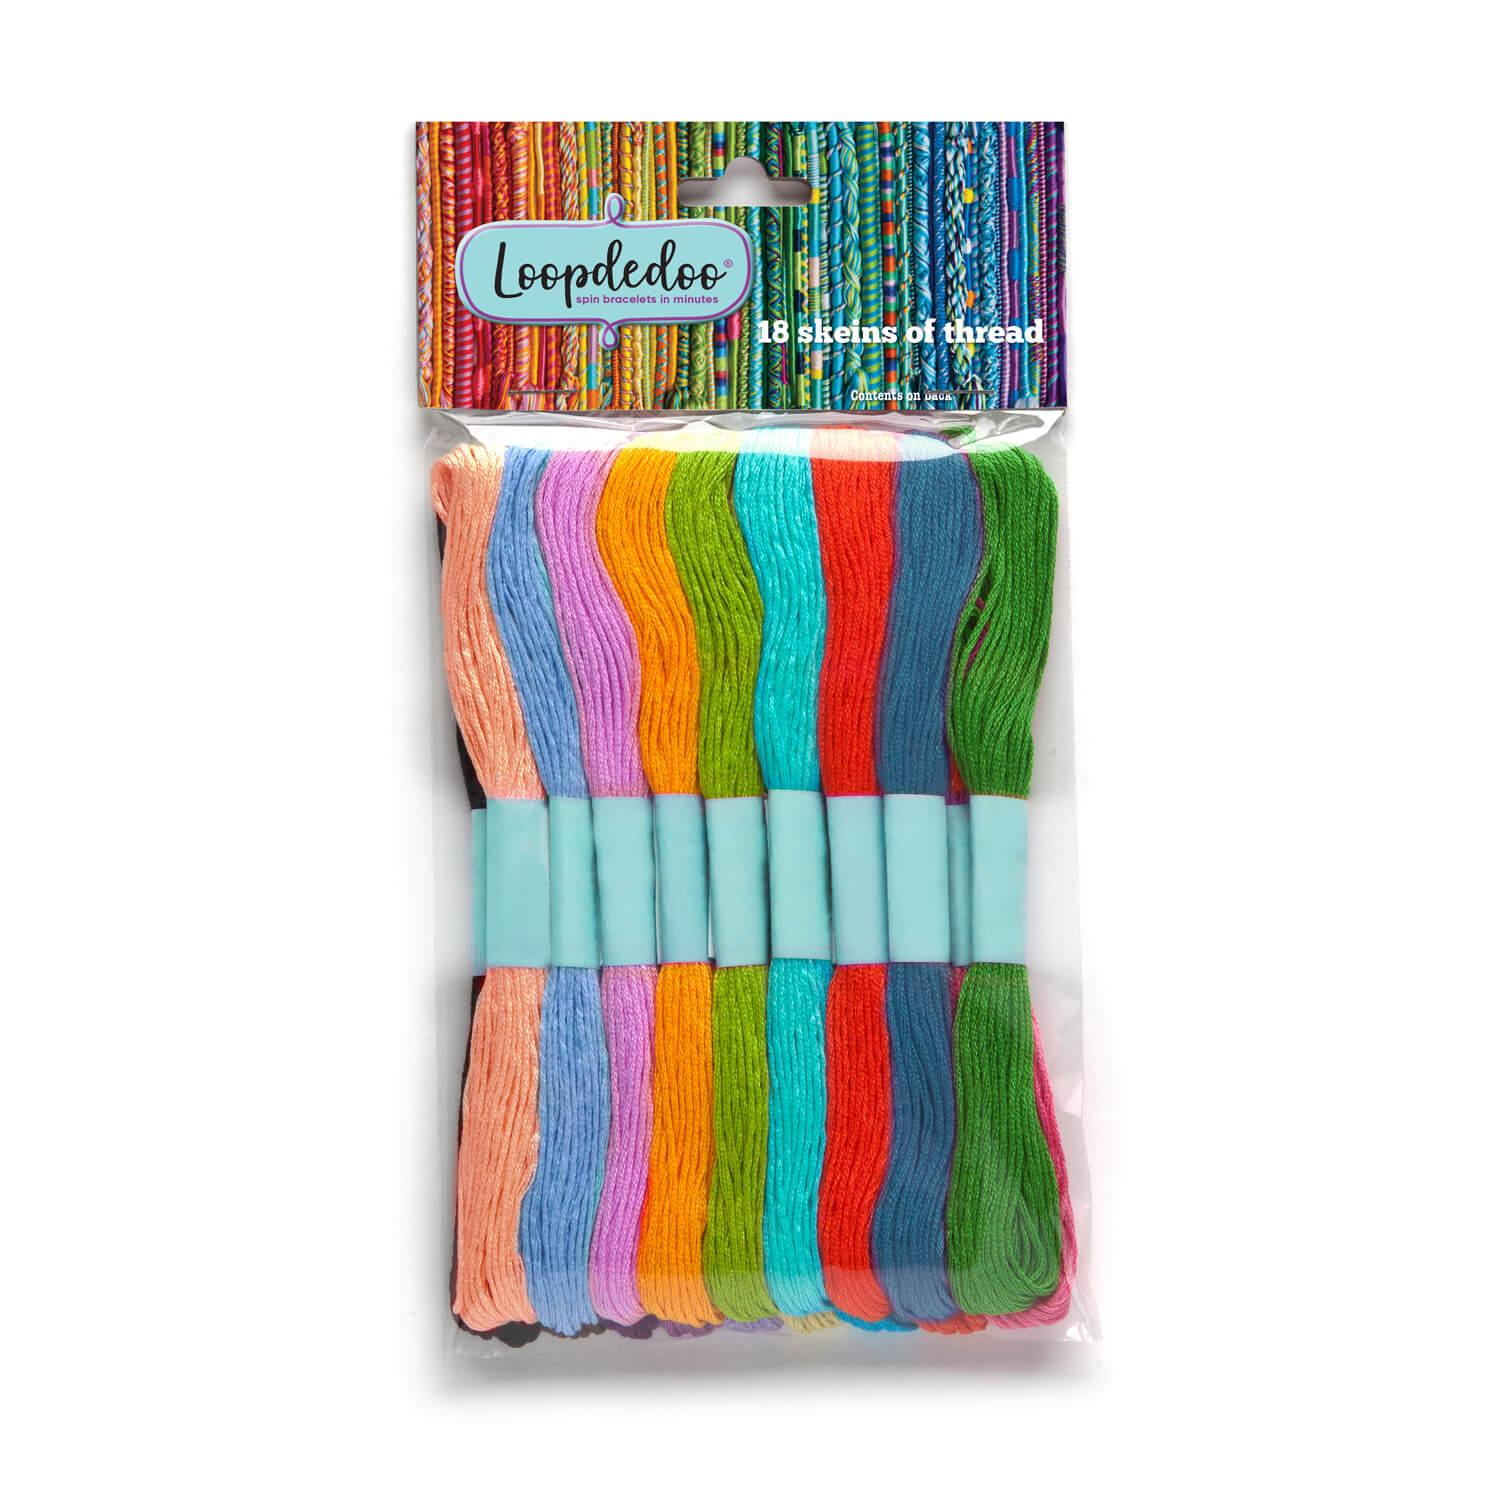 Loopdedoo Refill Threads, Standard Colors